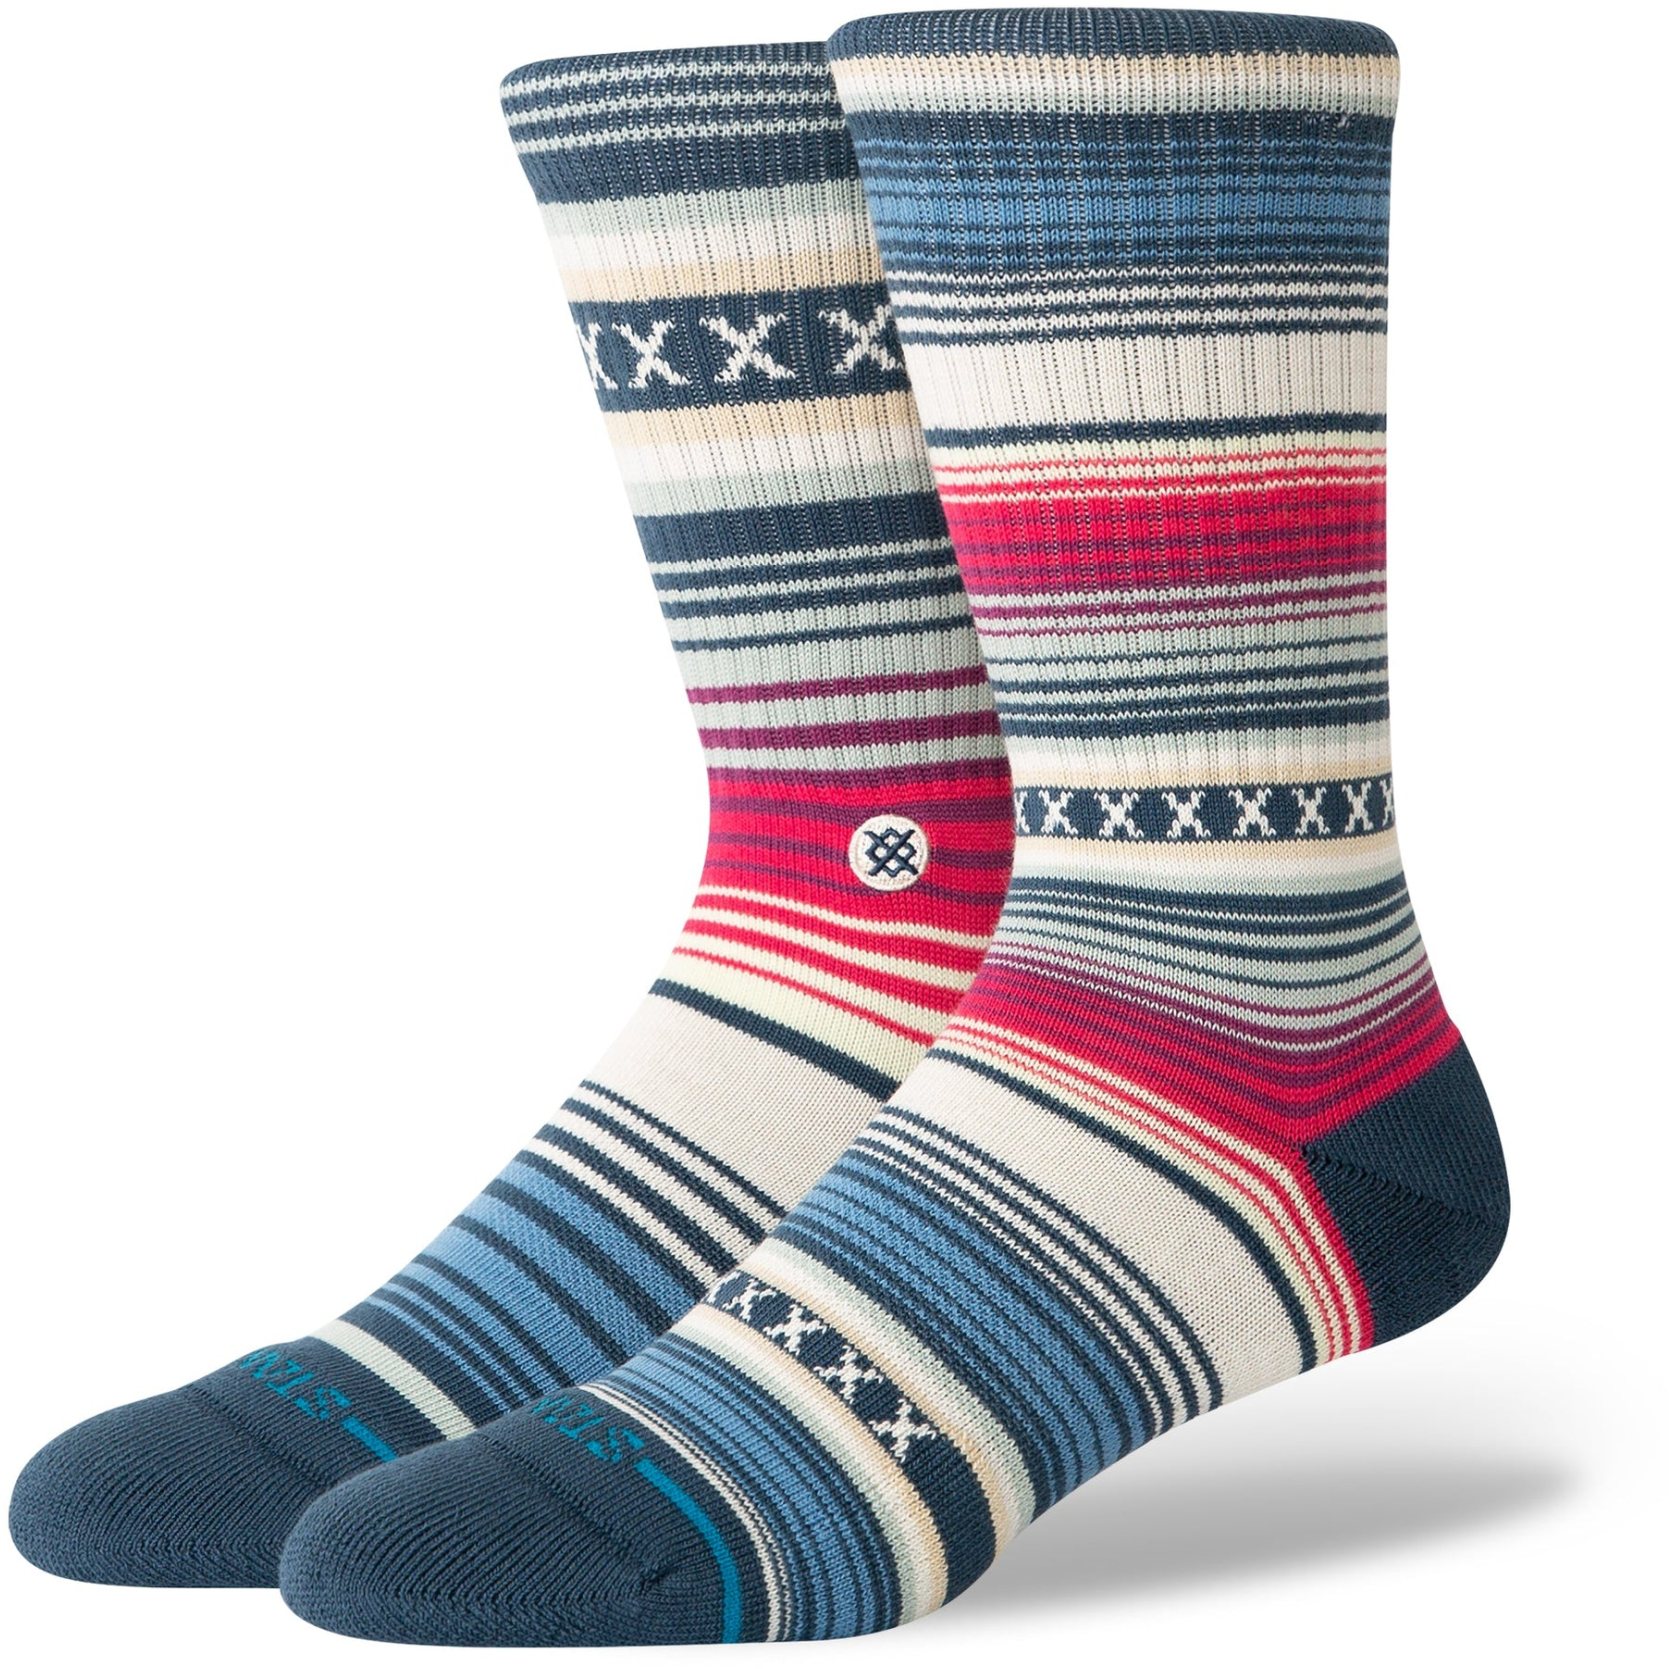 Picture of Stance Curren St Crew Socks Unisex - navy